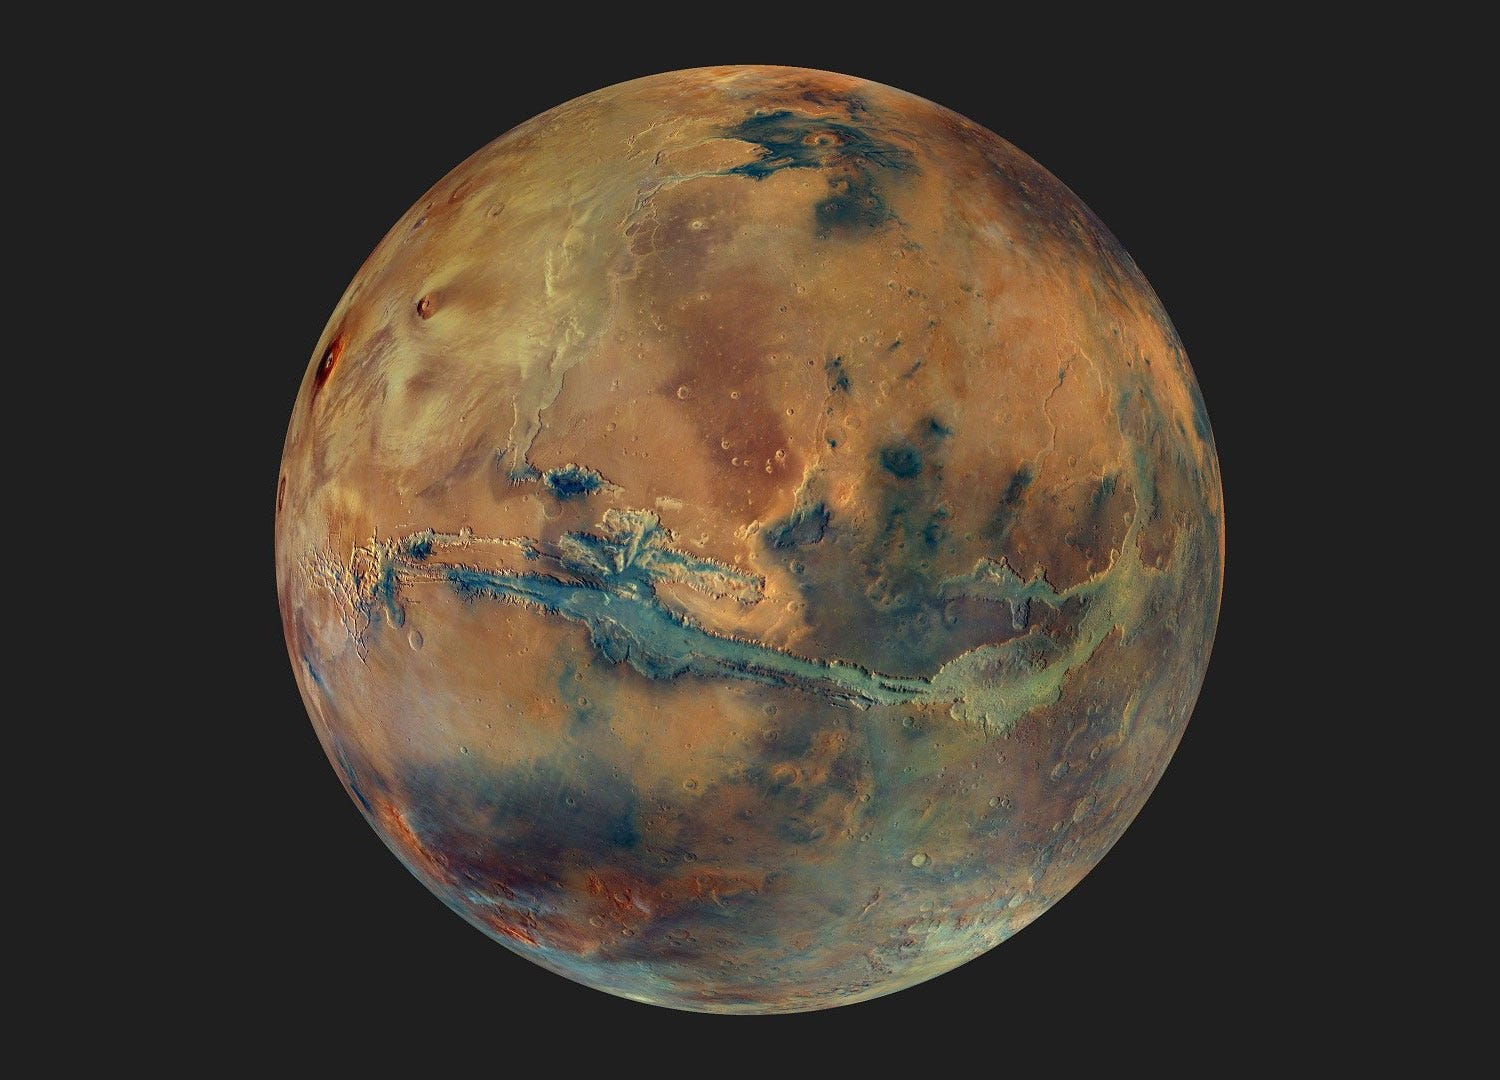 Enhanced-color Mars is more dull orange near the top right, with a darker brown area in the lower right, and a long greenish slash across the middle that is Valles Marineris.